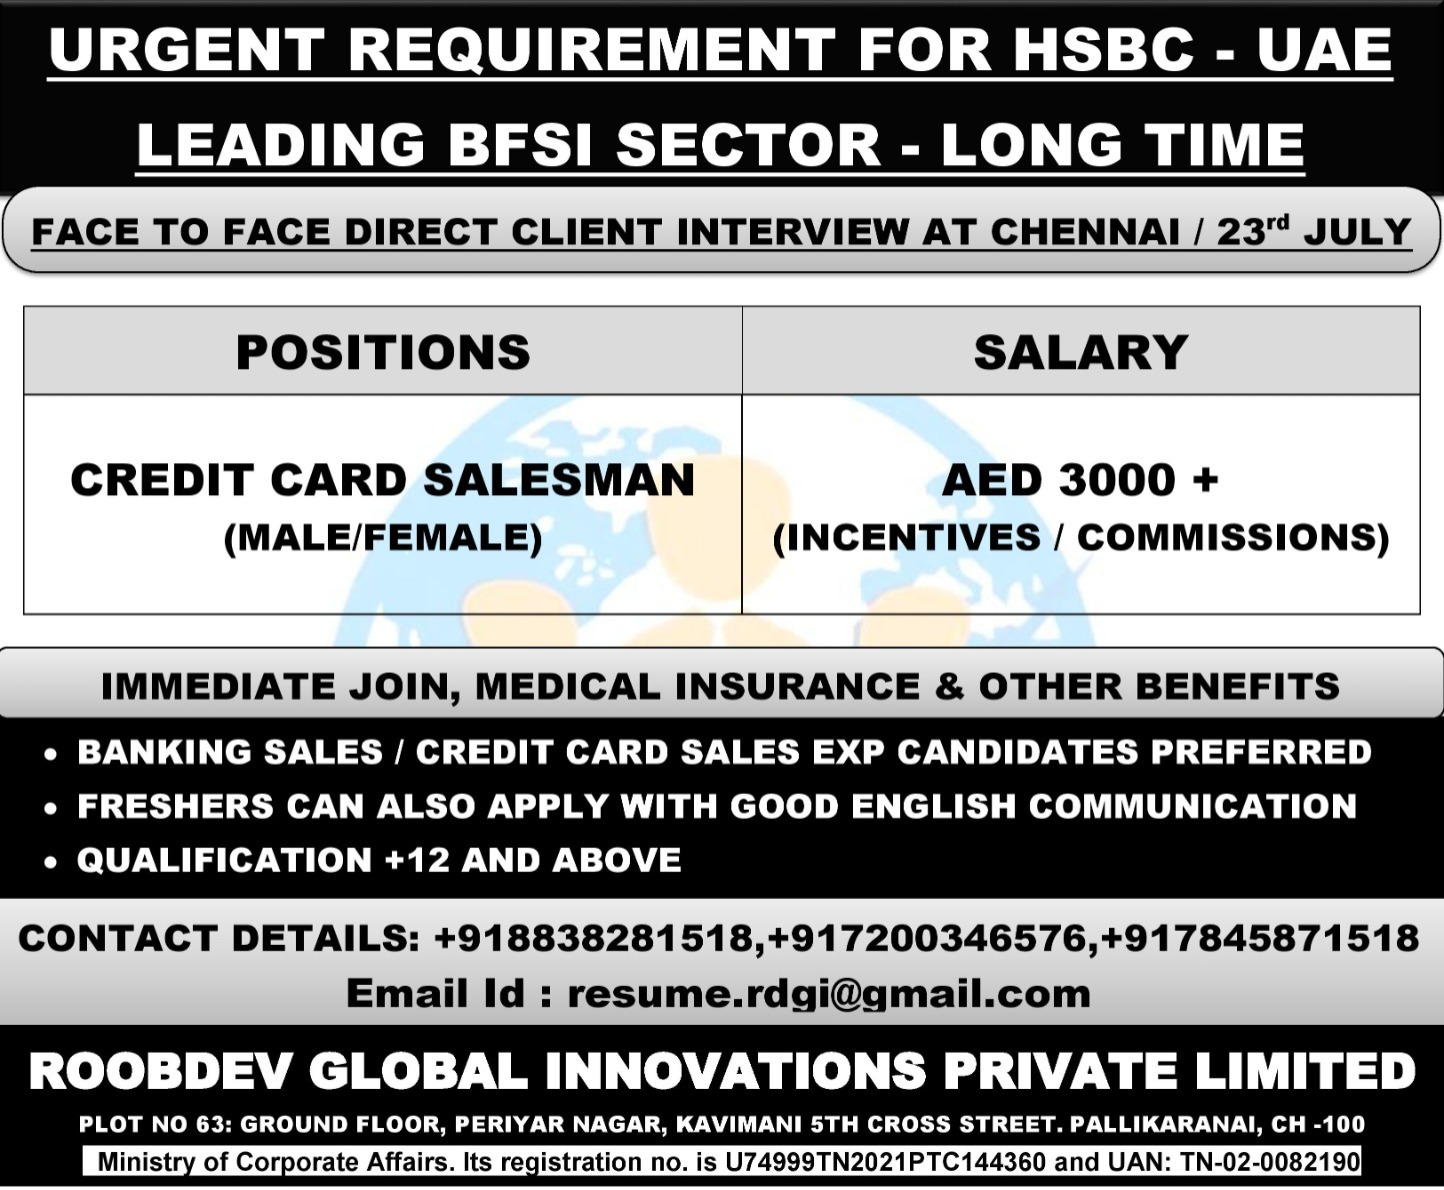 Client Interview for UAE